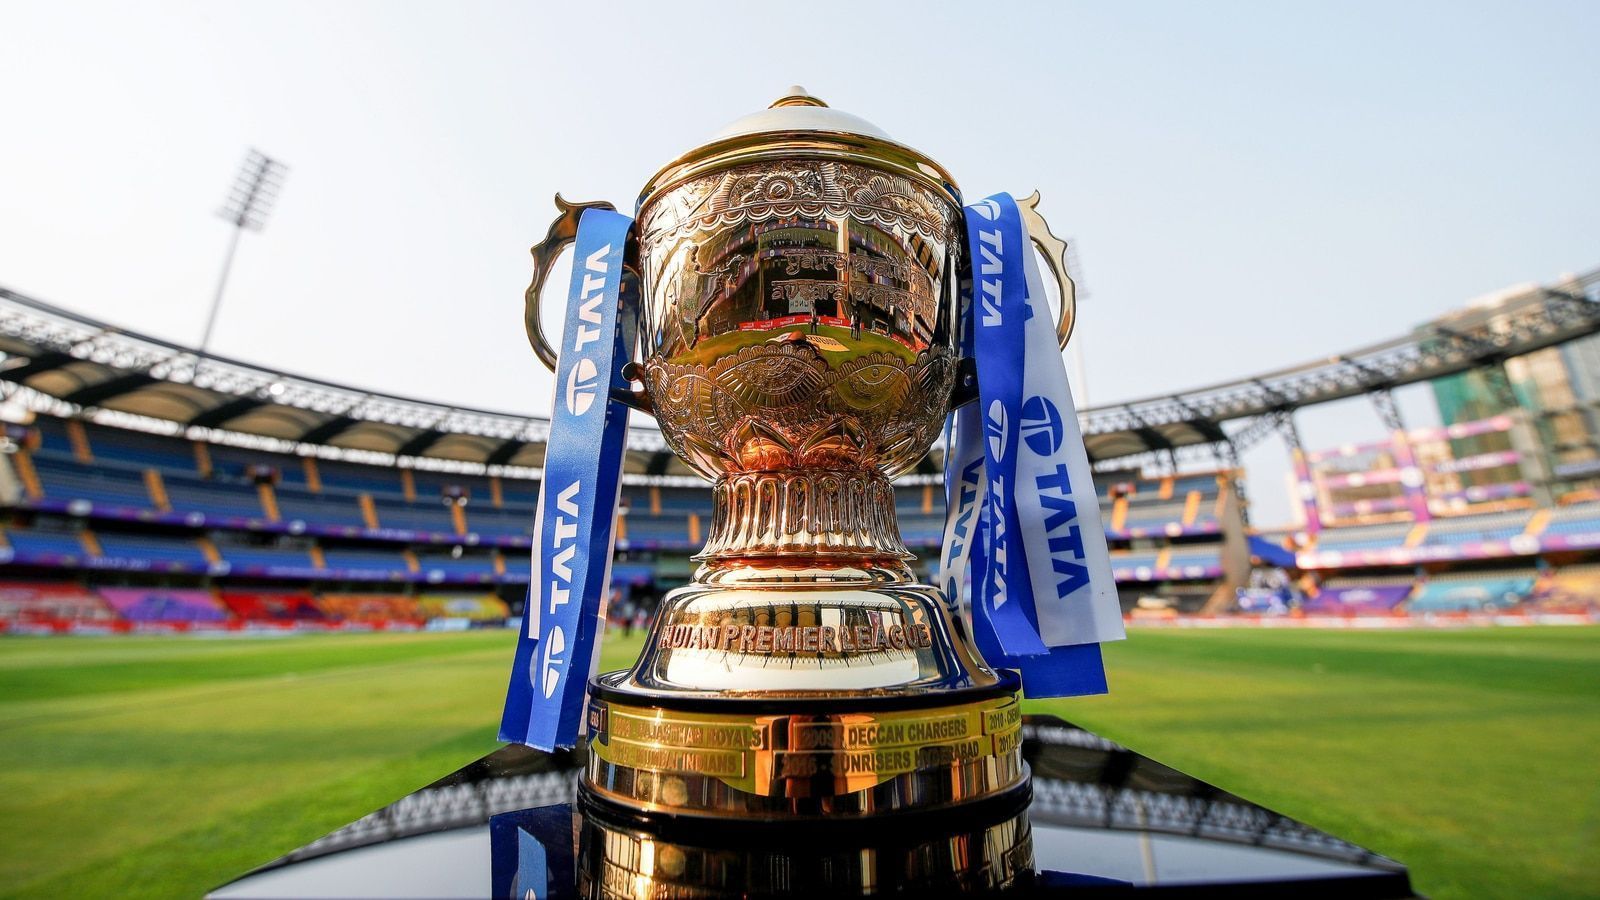 IPL Auction is set to take place on 23 December